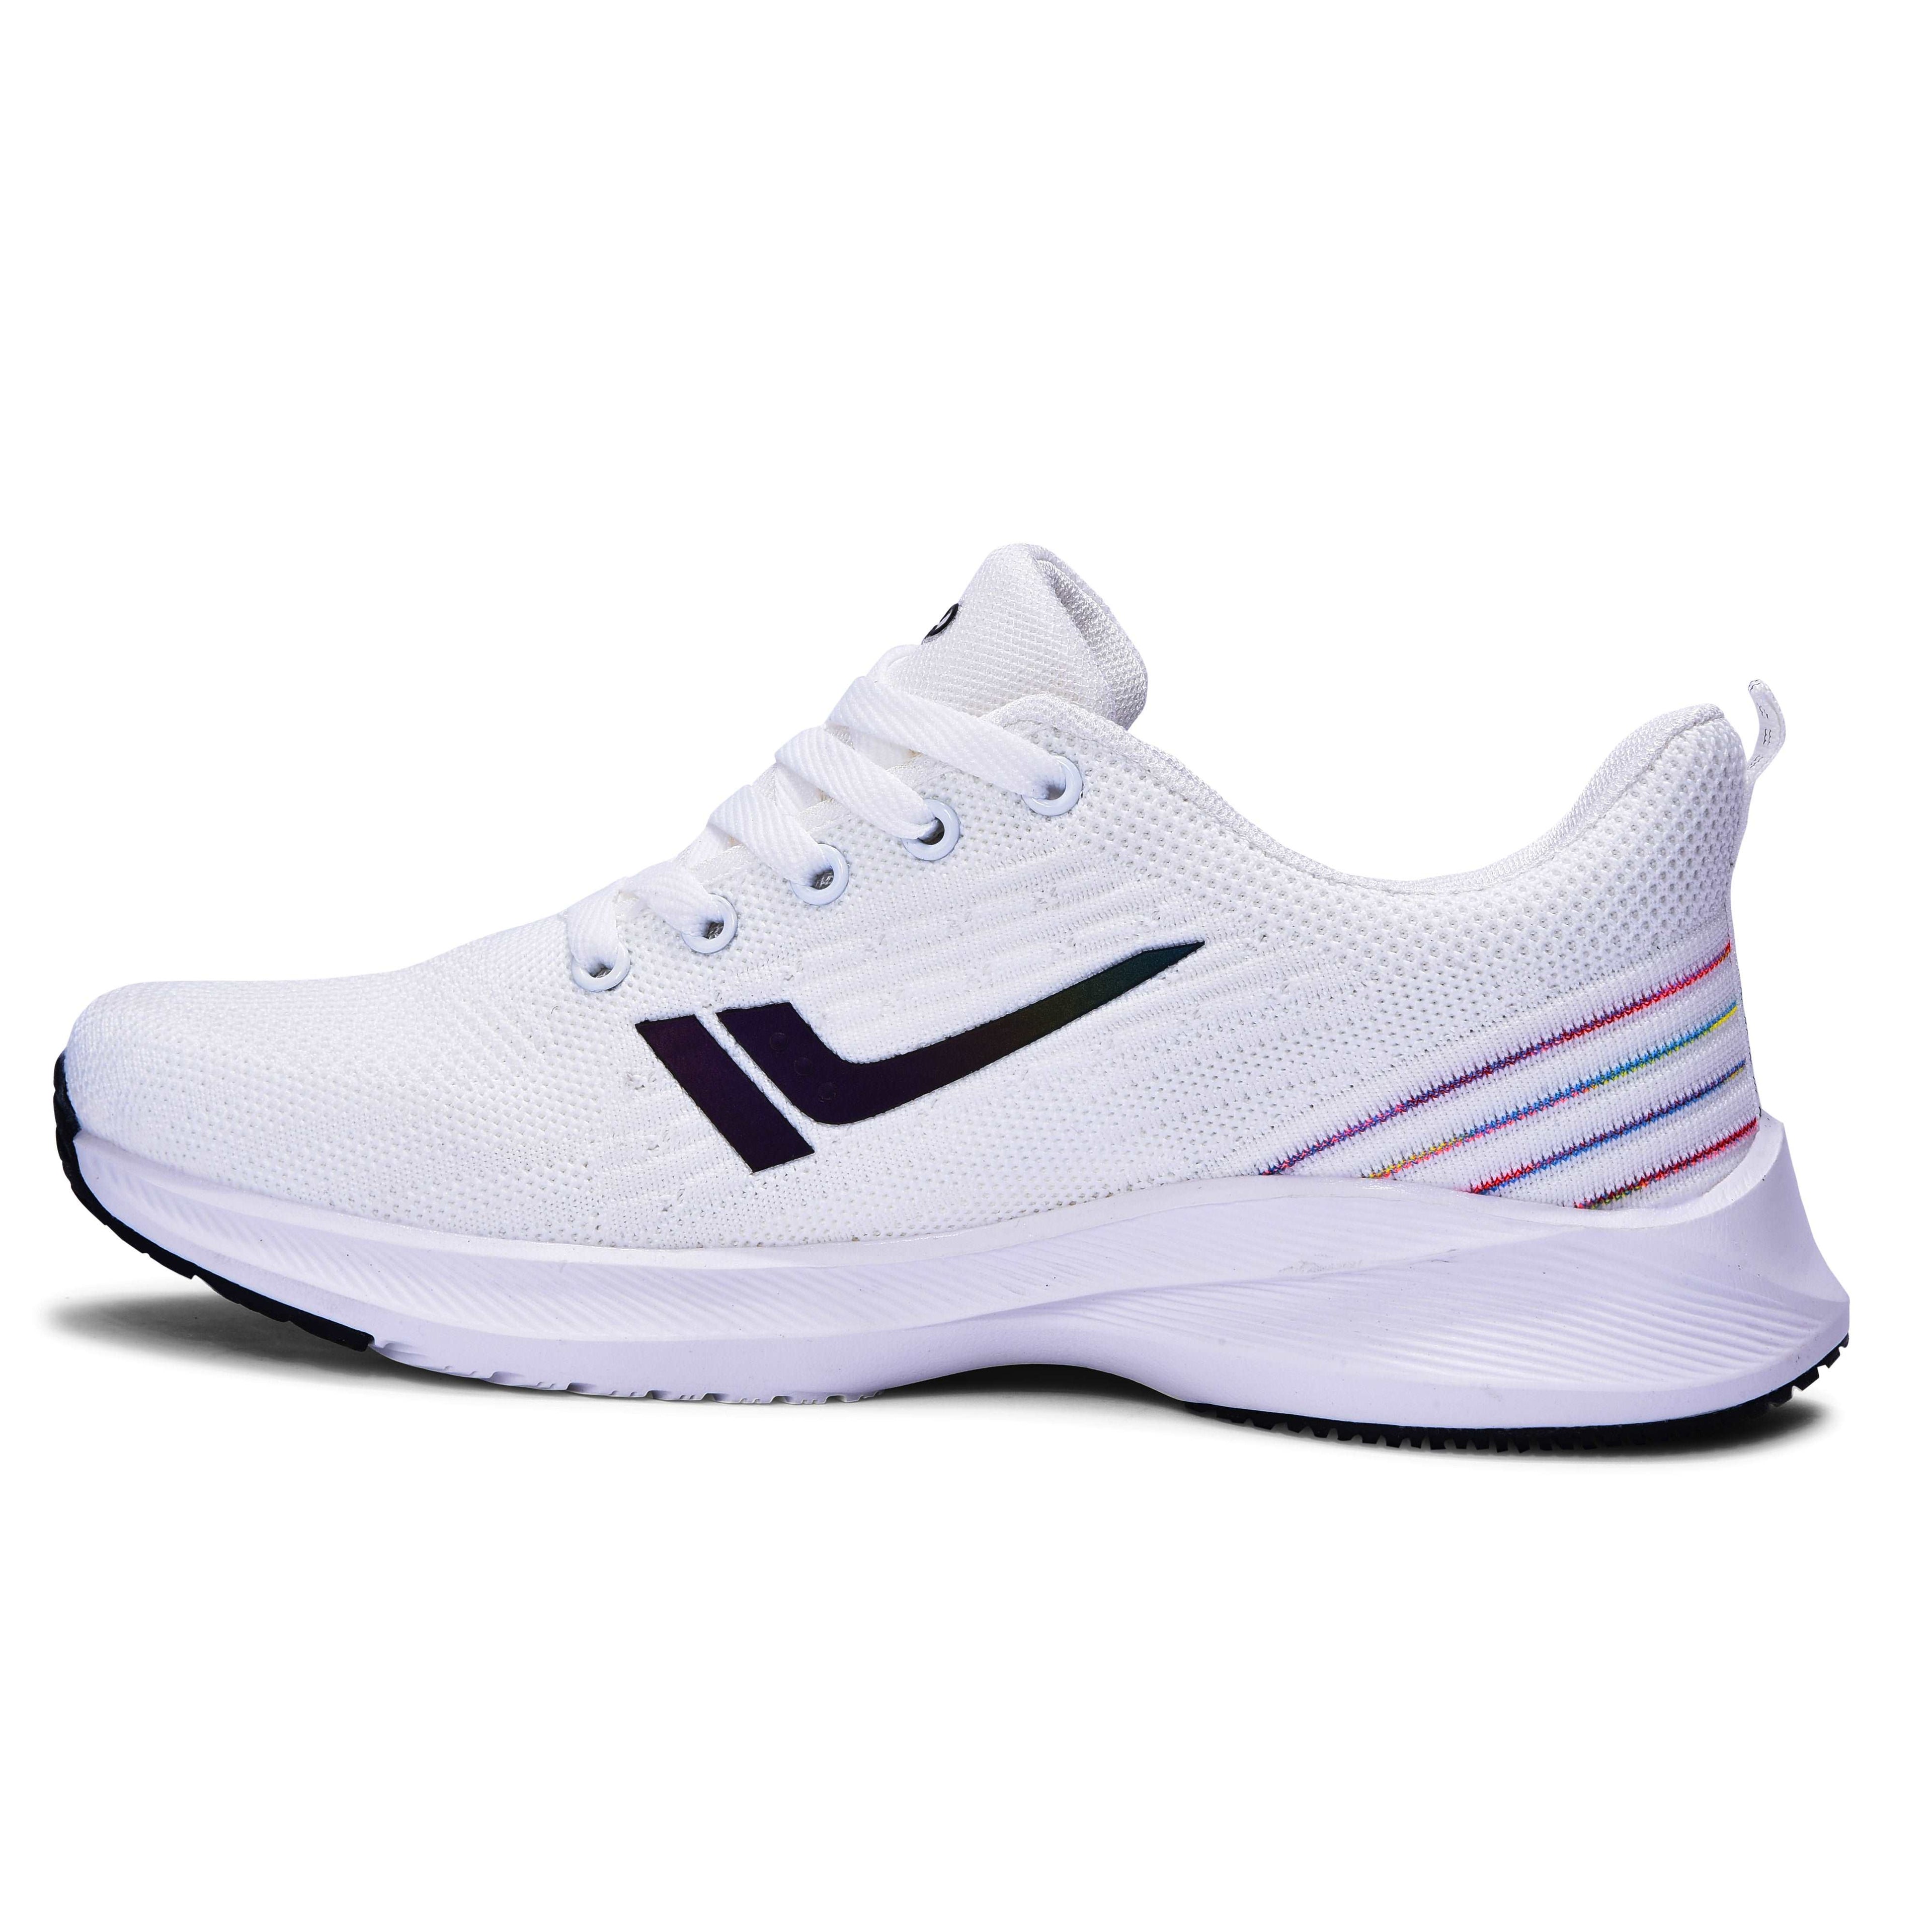 Calcetto CLT-0975 White Running Sports Shoe For Men